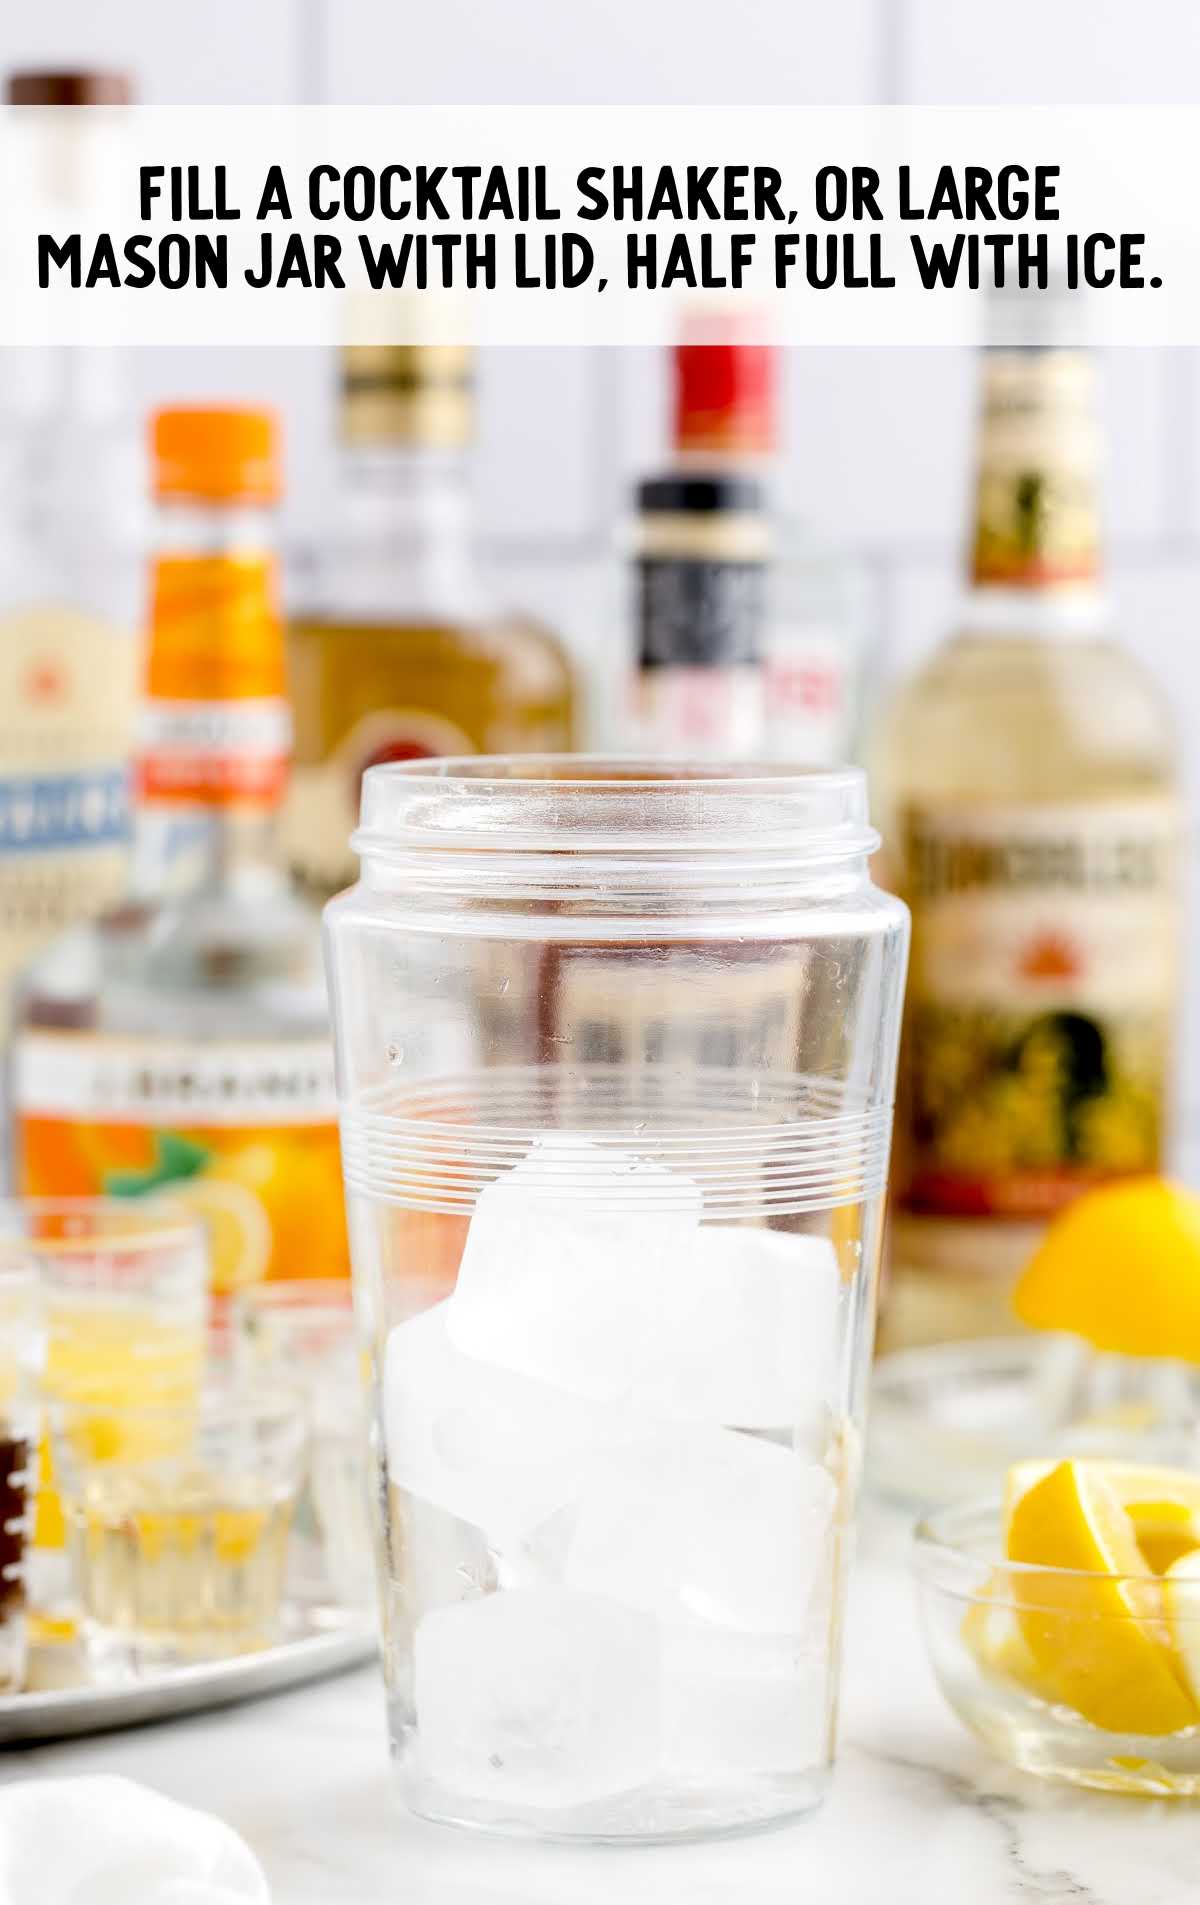 pieces of ice in a cocktail shaker